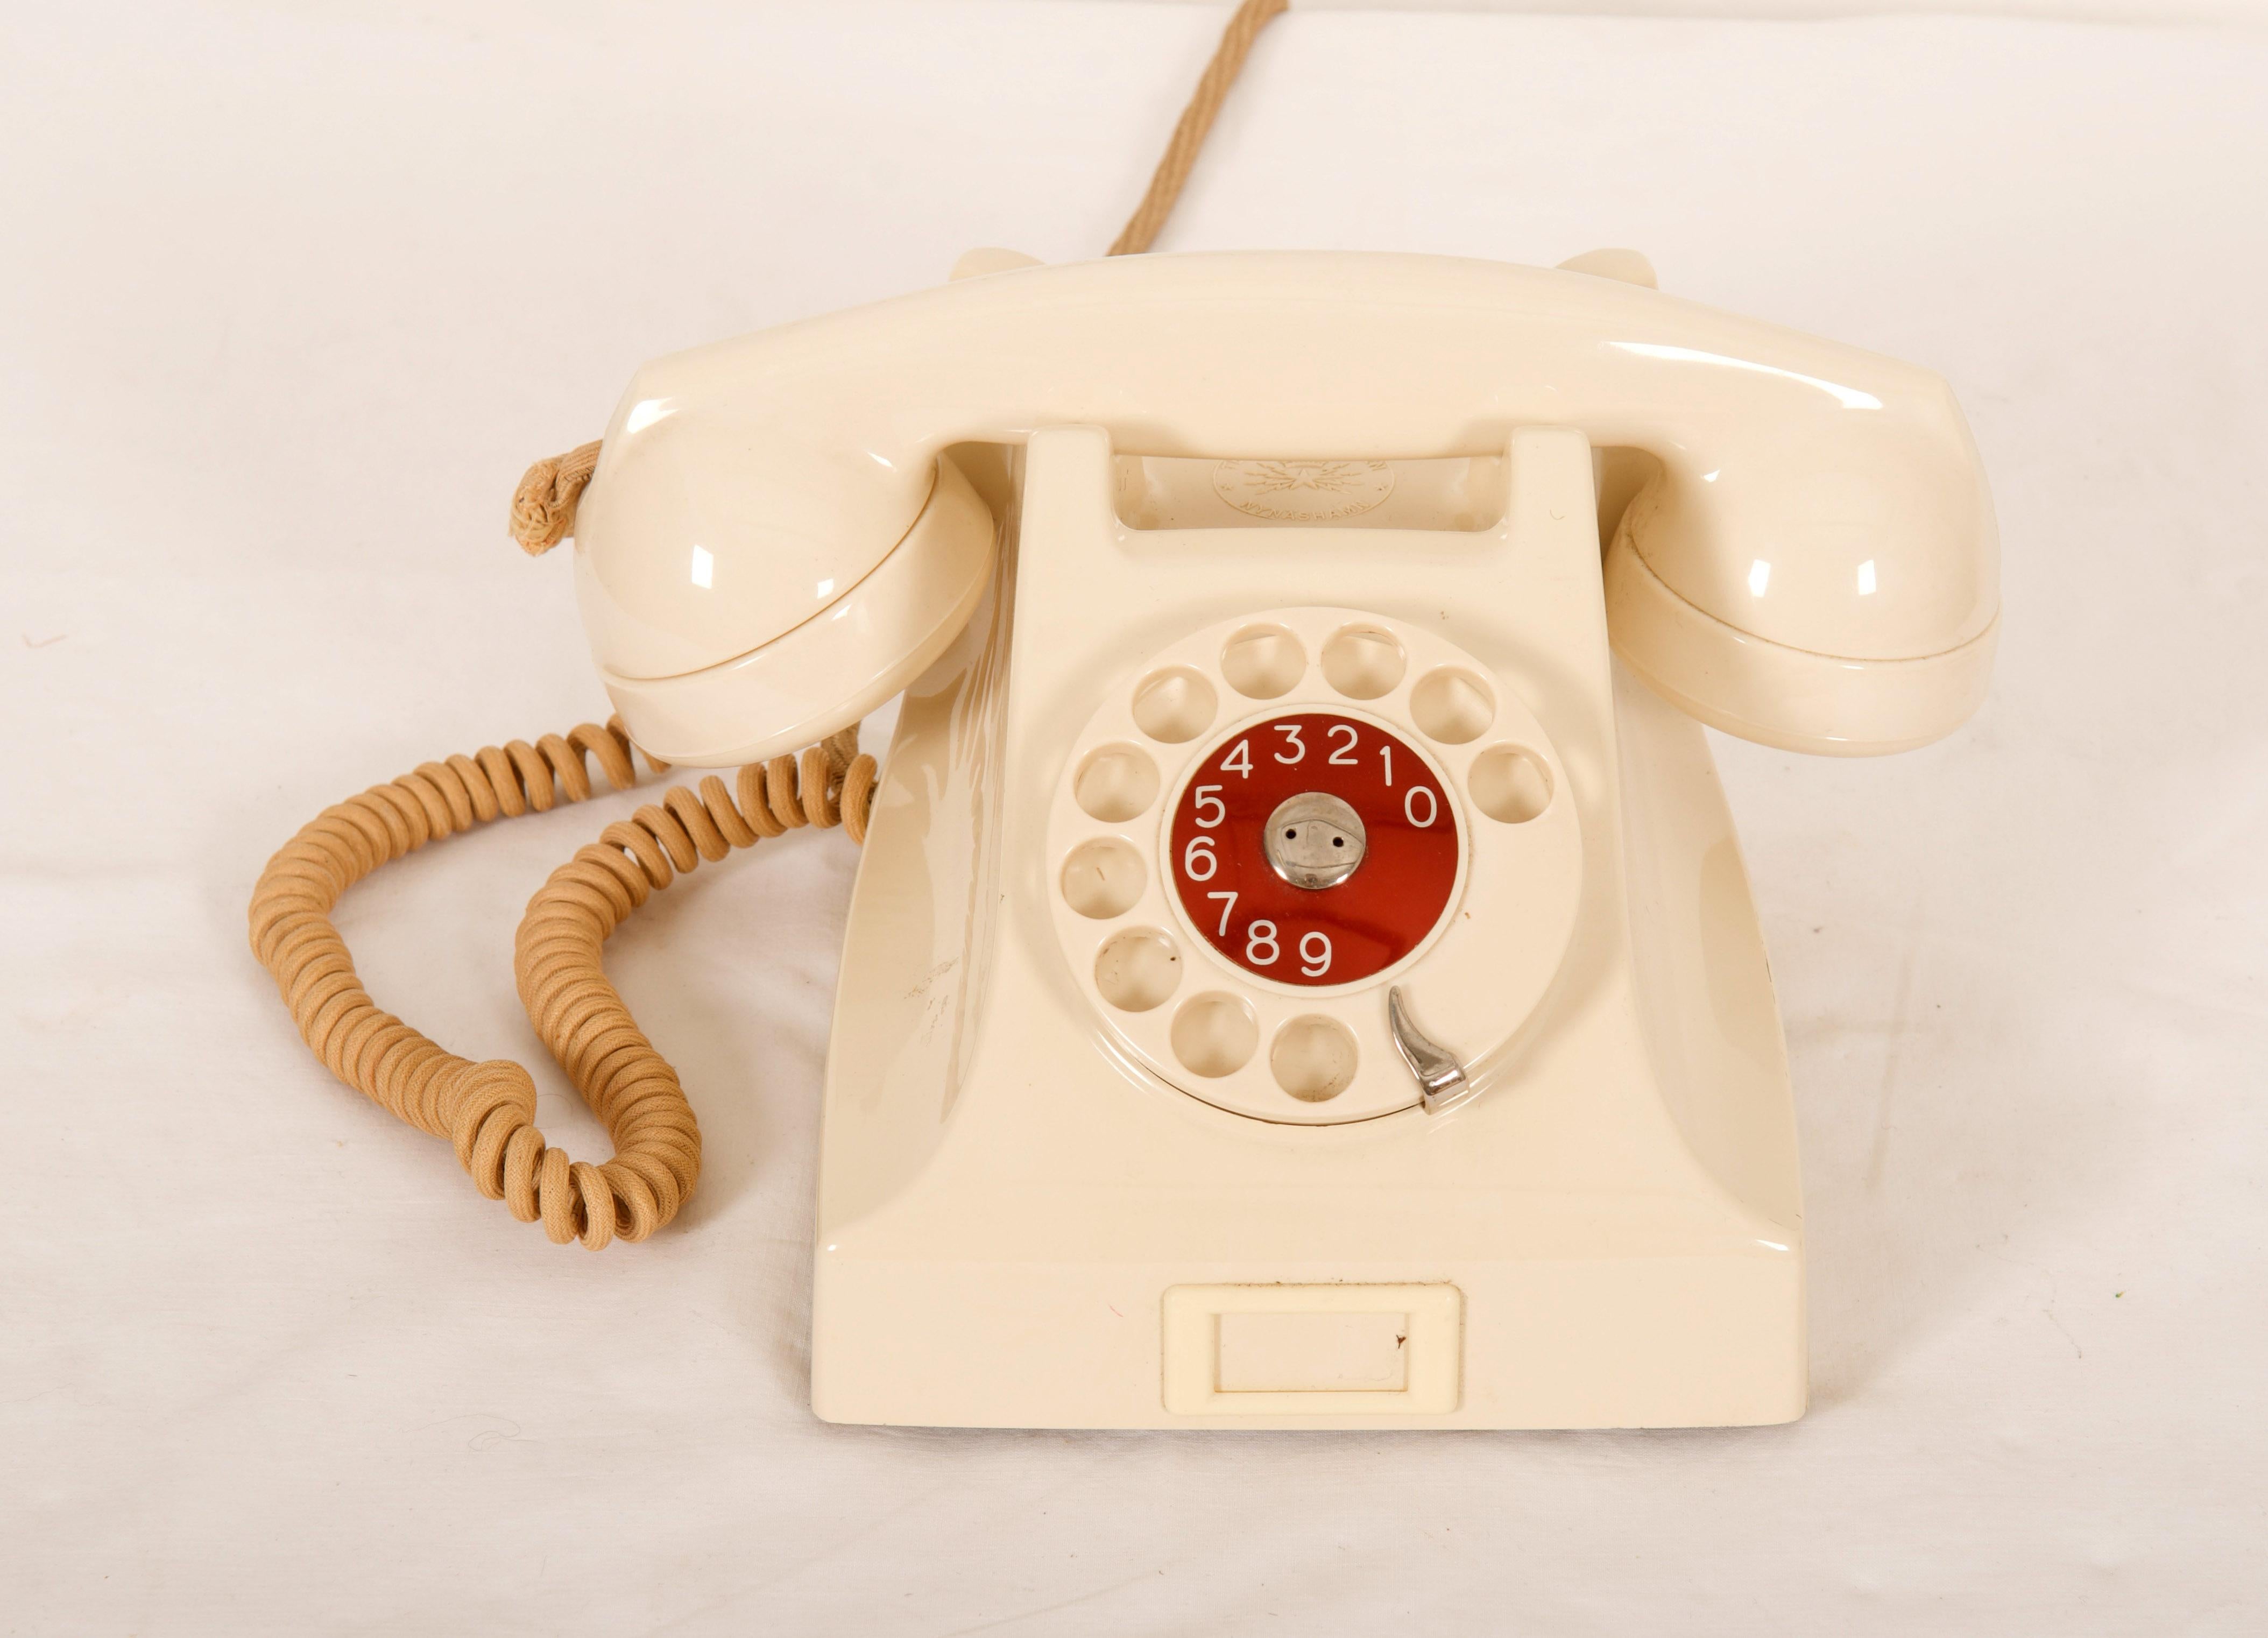 Bakelite table phone by LM Eriksson from the early 1960s. Repaired on the side see the last 2 pictures
 